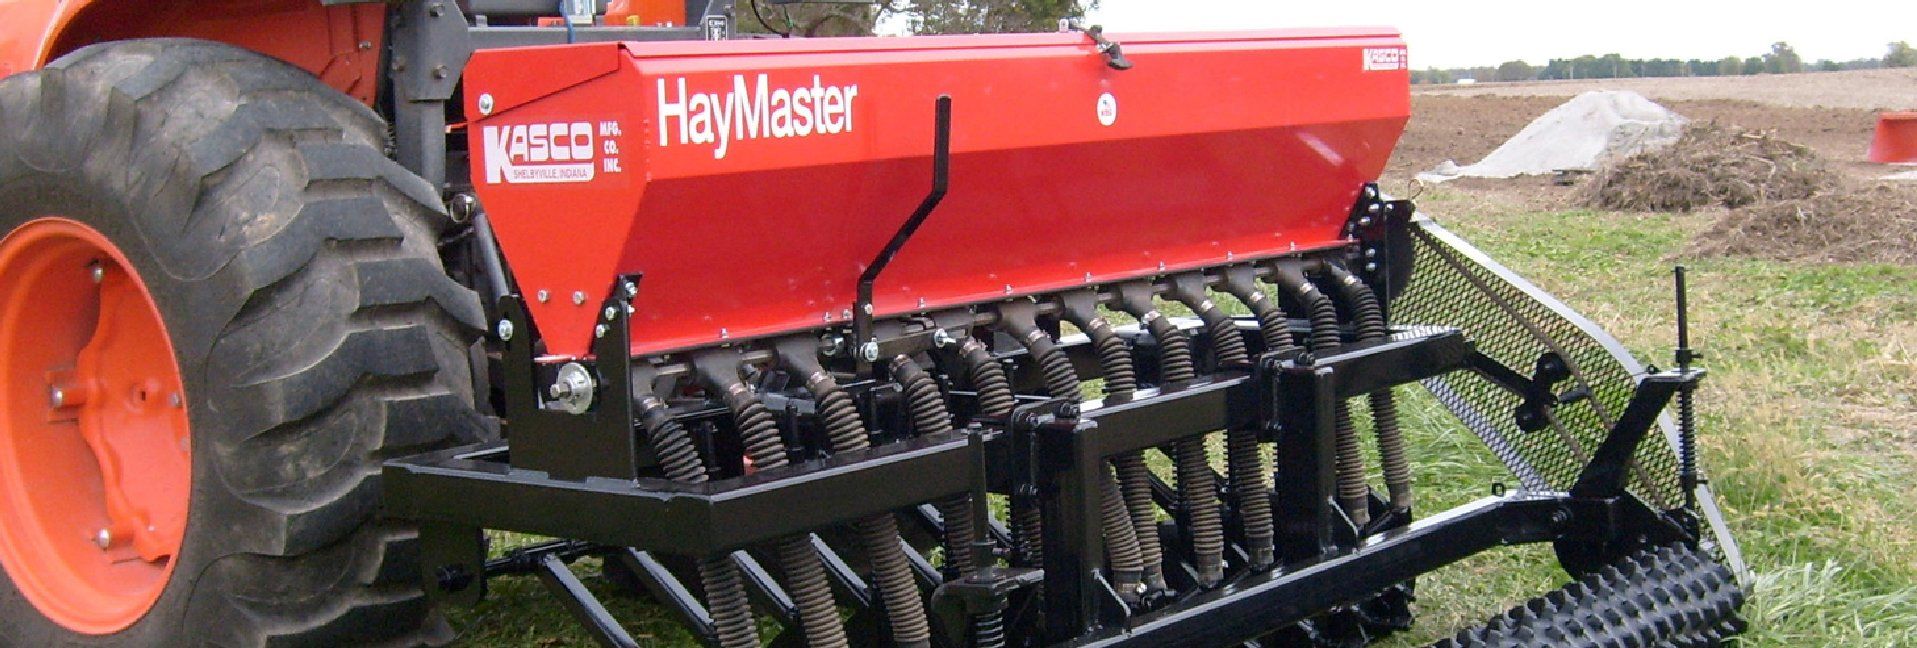 NEW MIN-TILL DRILL FOR HAY PASTURES FROM KASCO MANUFACTURING